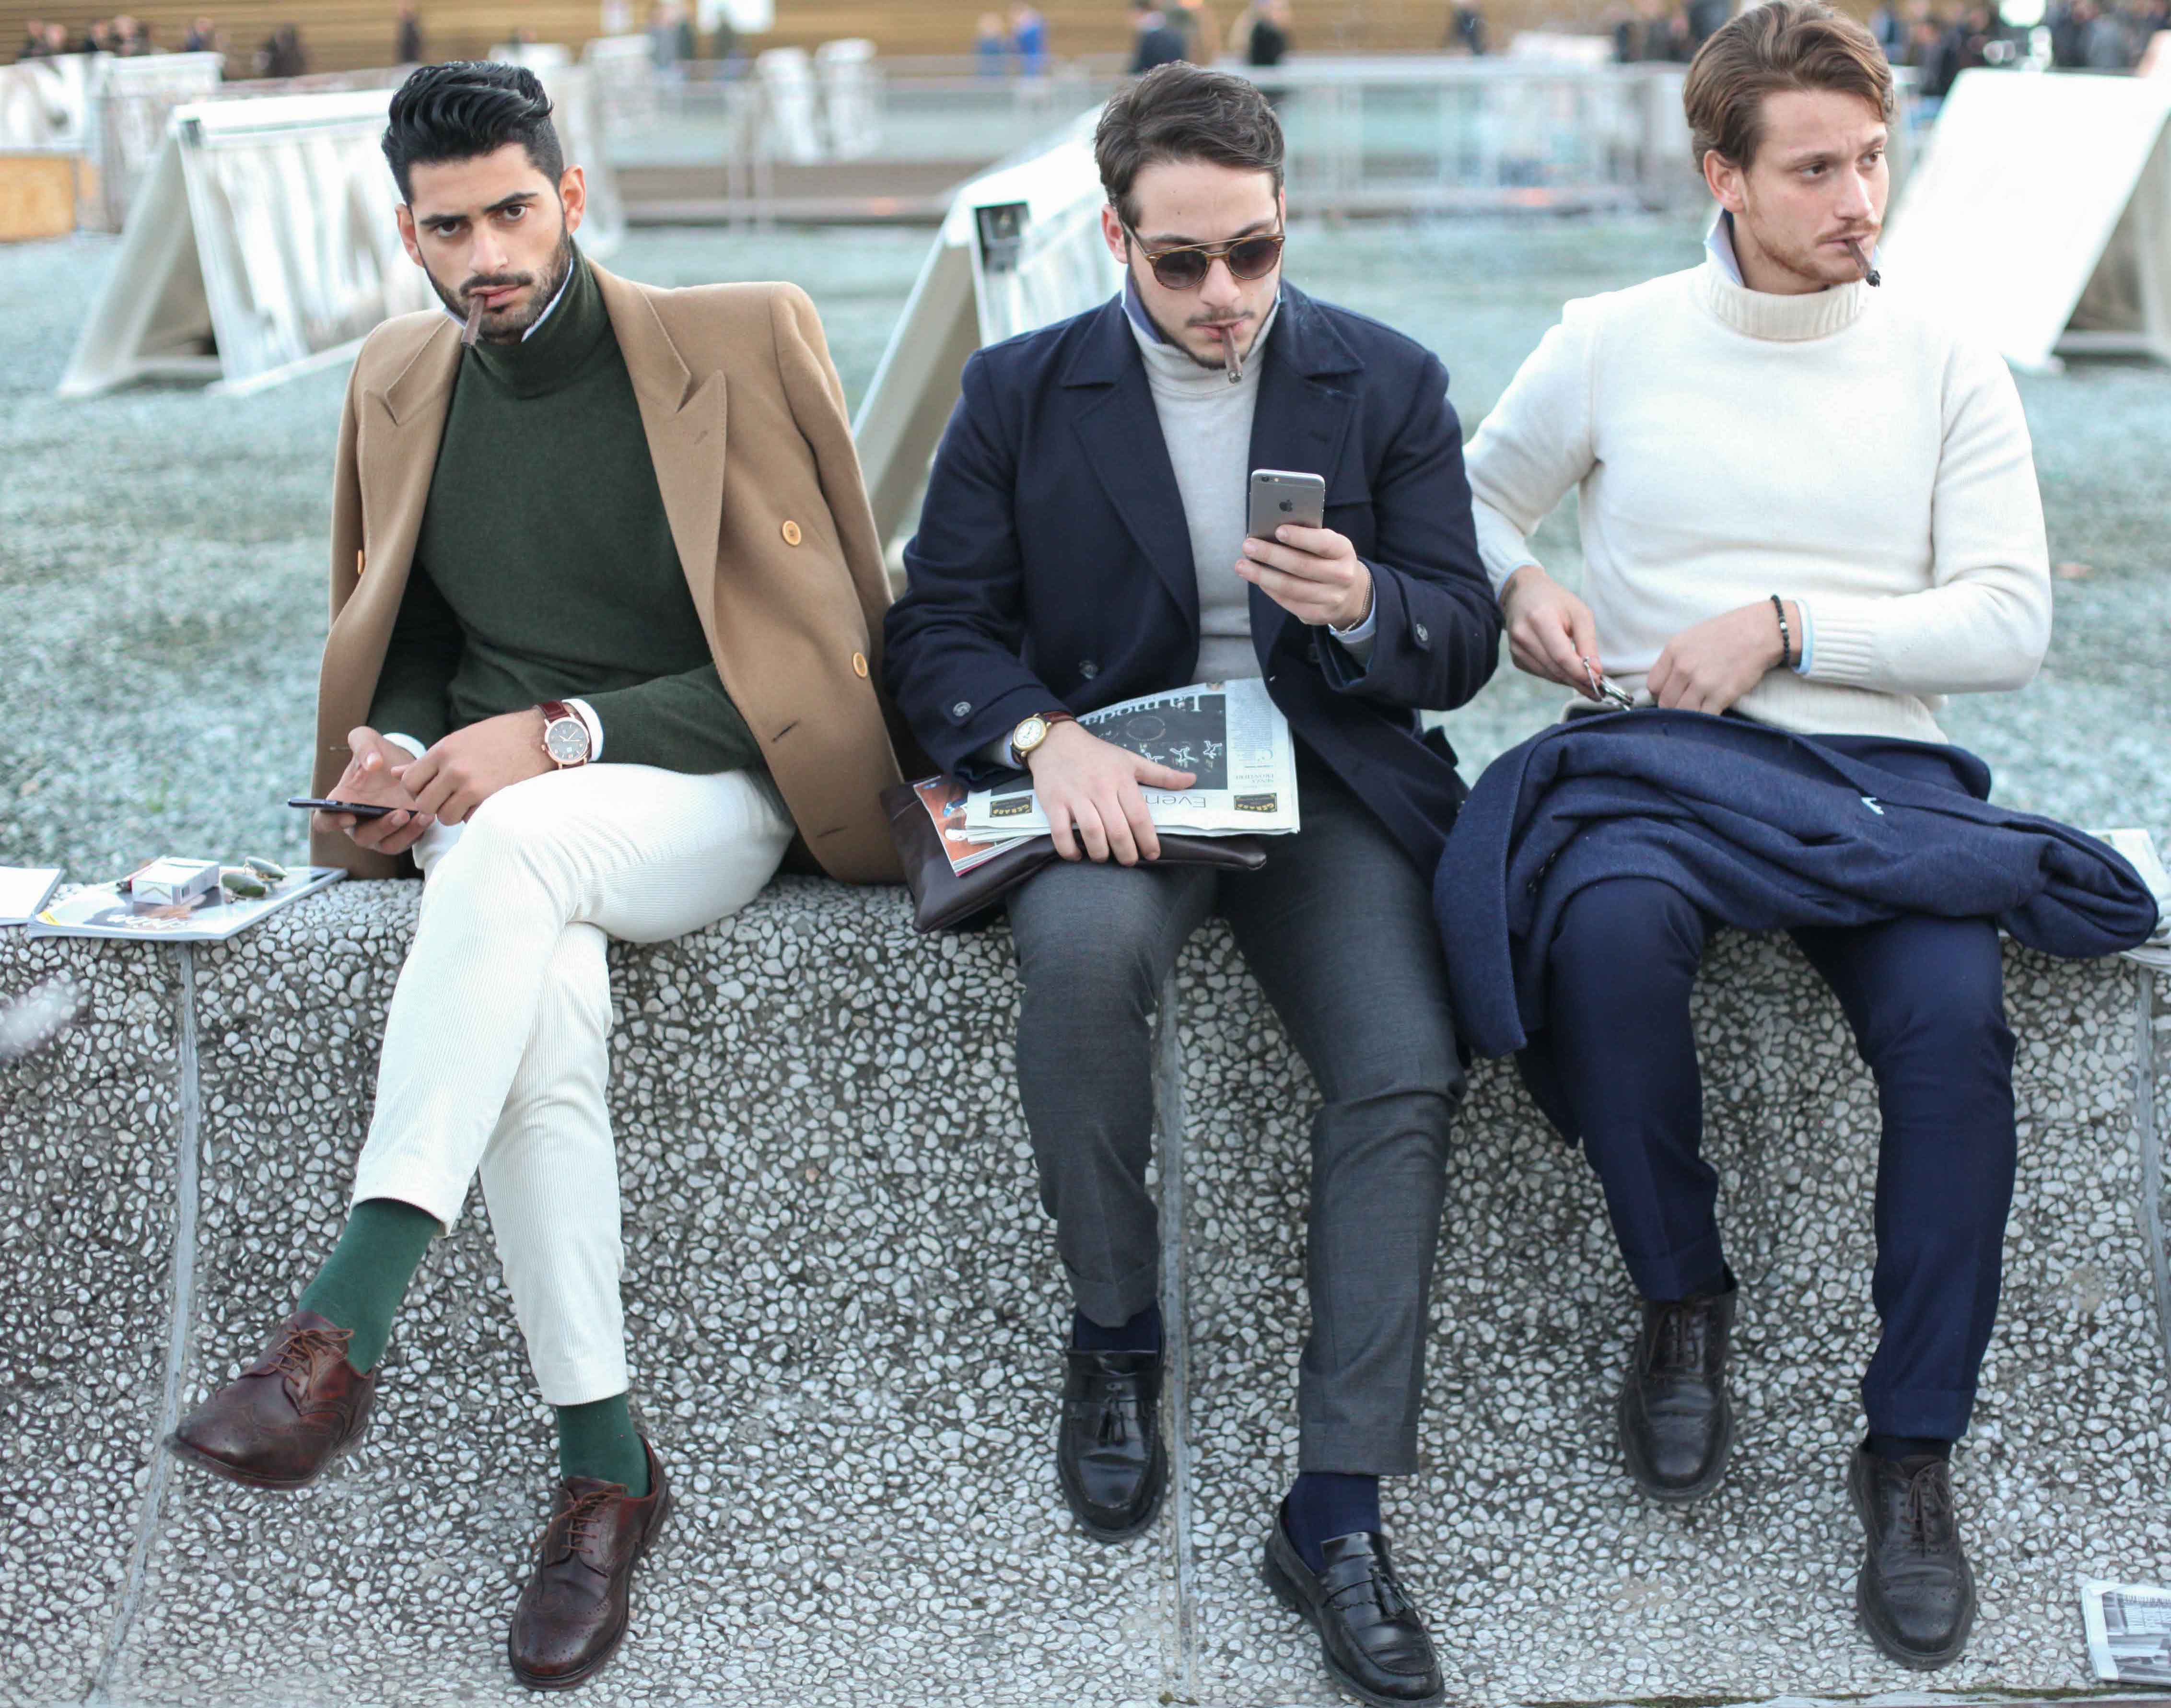 In Style We Trust: Pitti Uomo 89 Finest Street Style | HuffPost Life